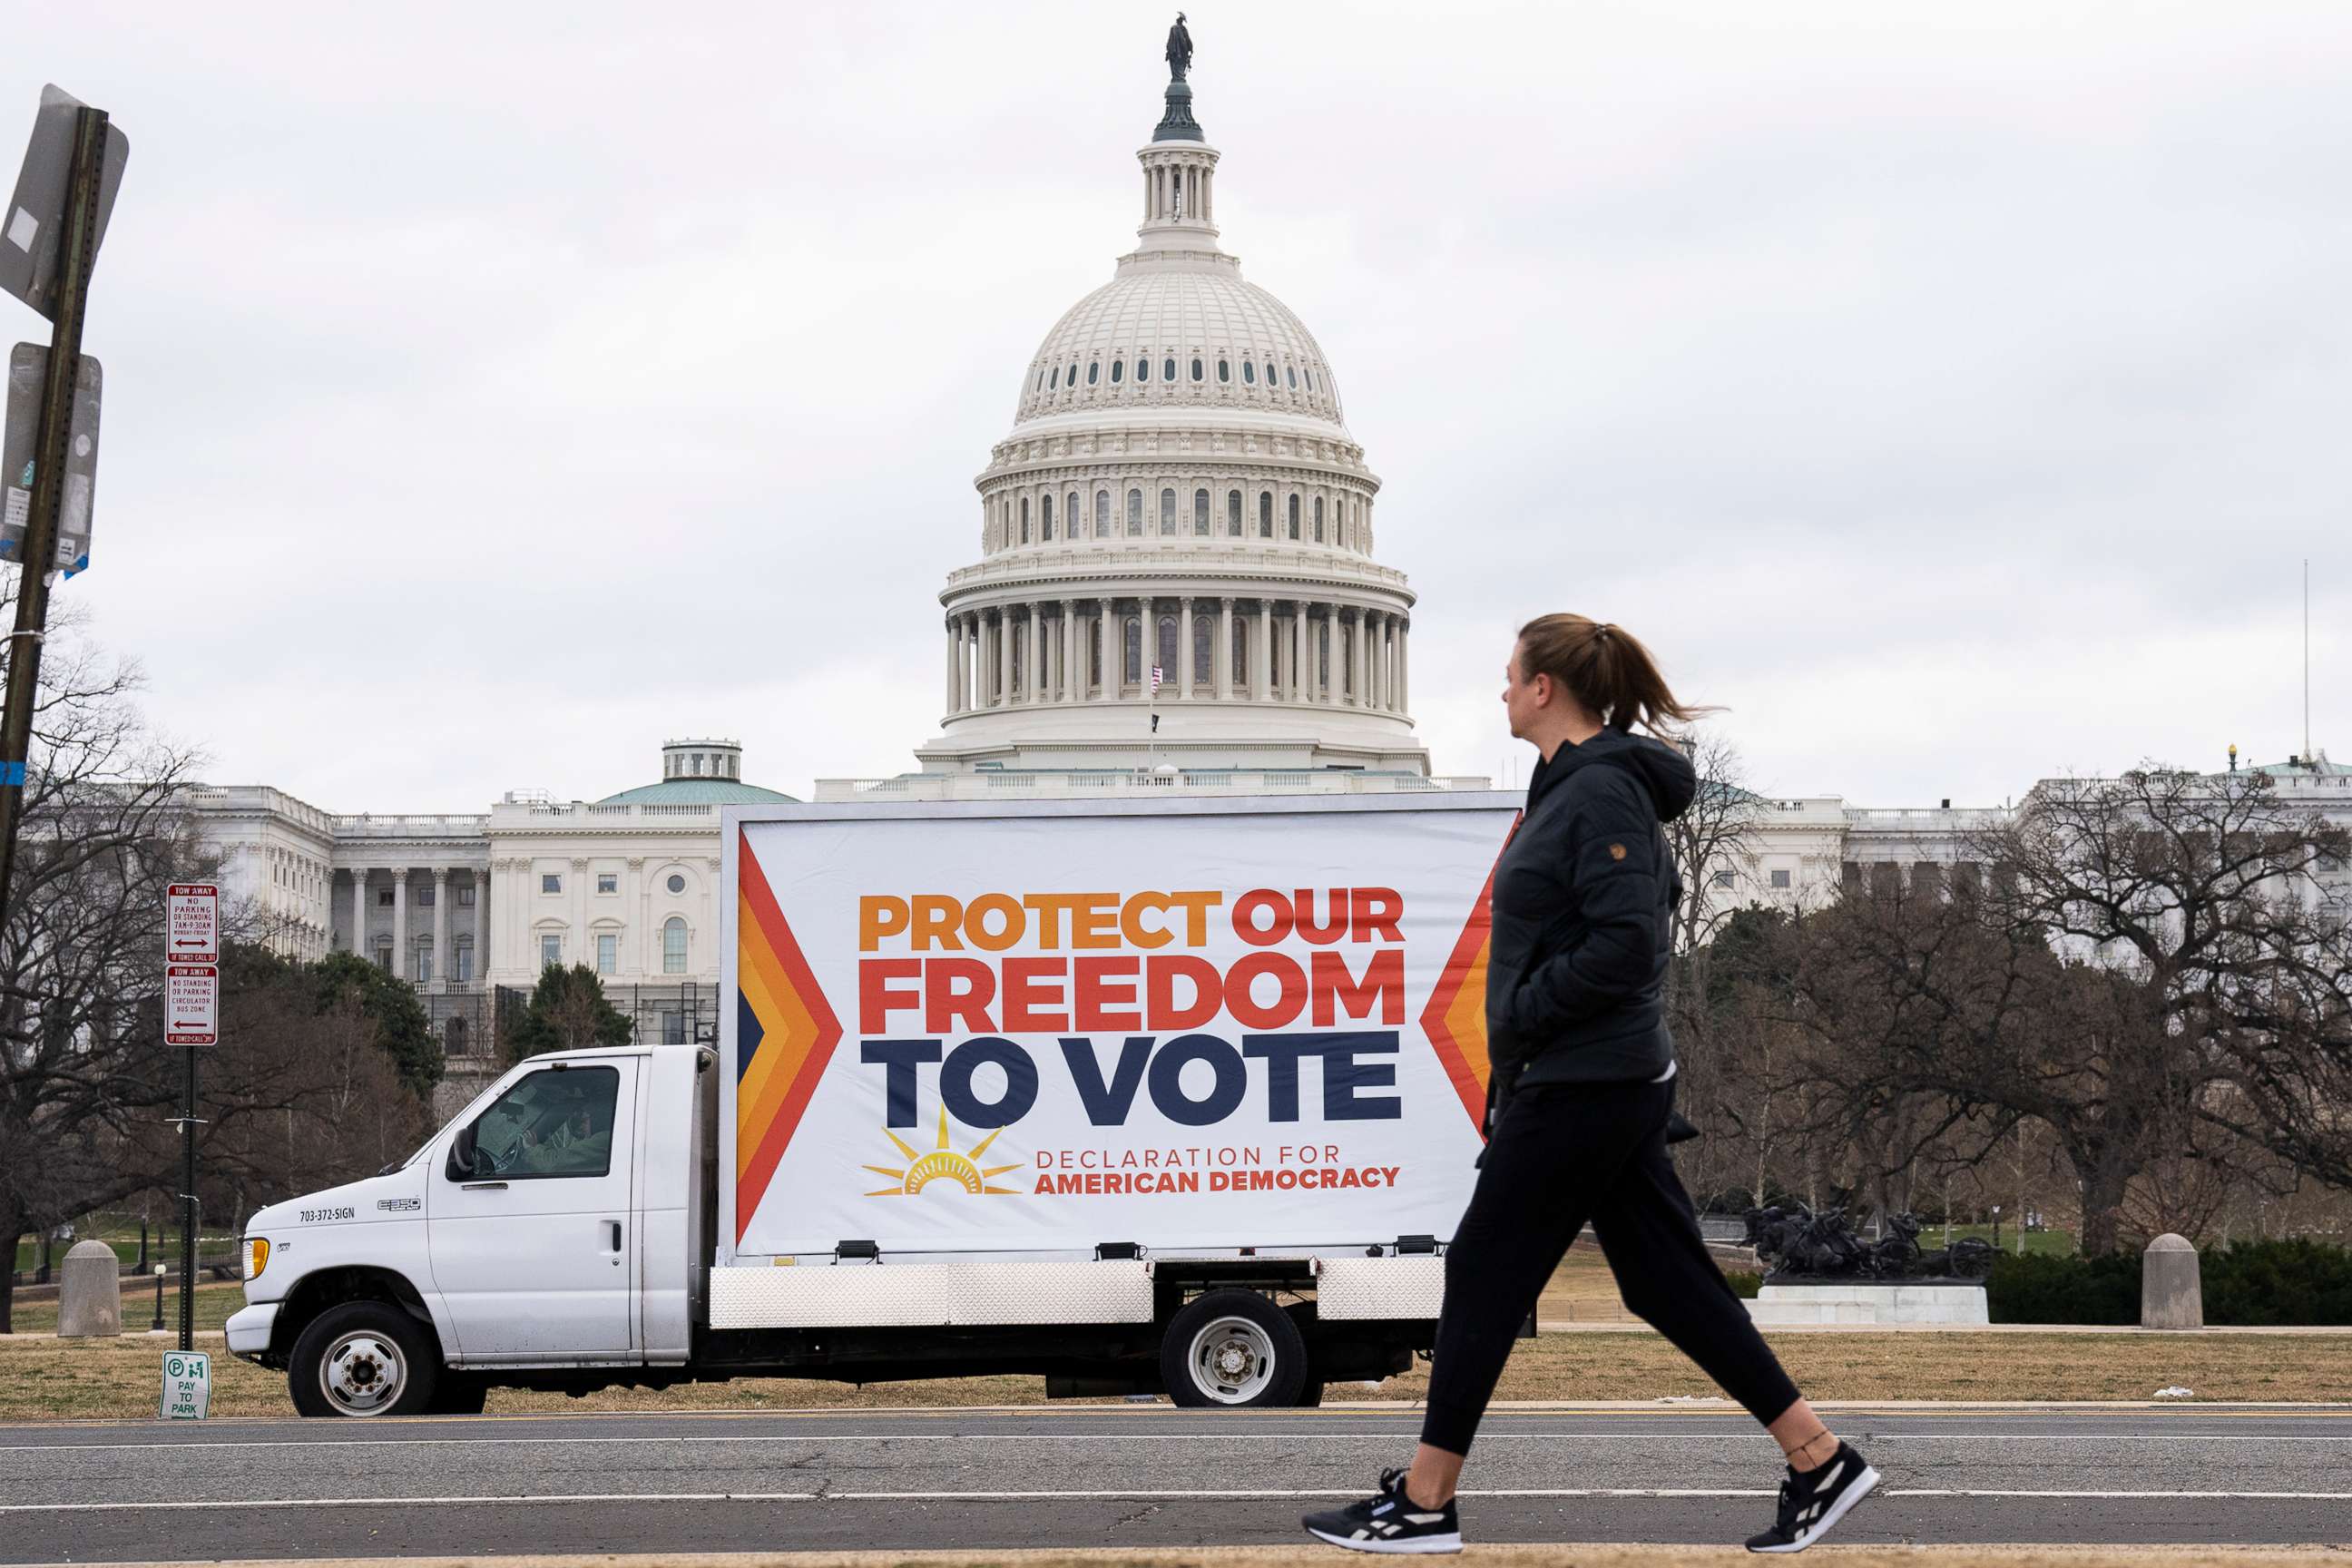 PHOTO: A message for the senate to pass voting rights legislation sponsored by The Declaration for American Democracy, is seen, Jan. 18, 2022, in Washington, D.C.